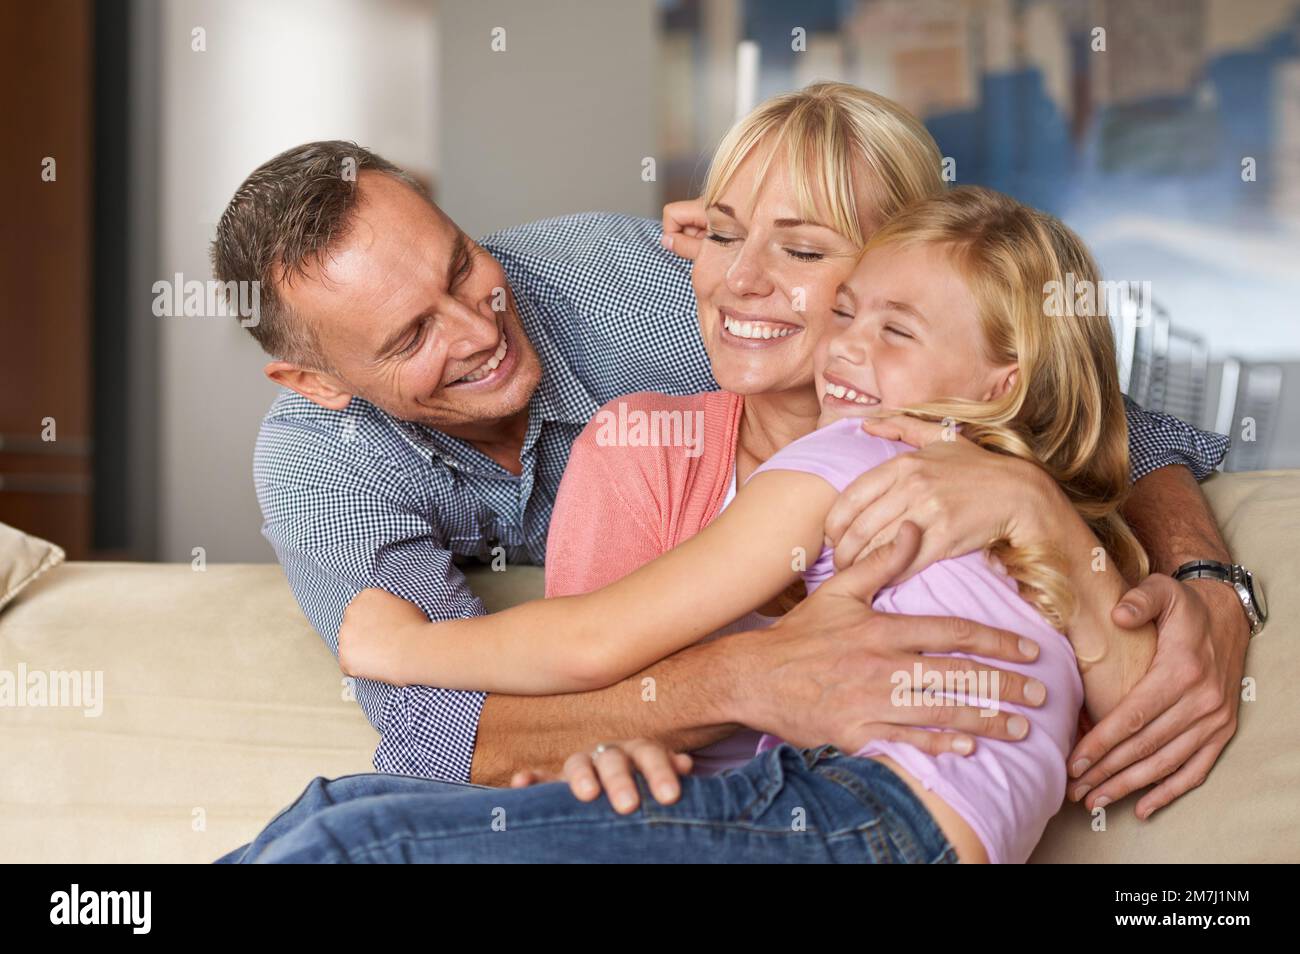 Treasure these moments. a loving family embracing each other on the sofa. Stock Photo